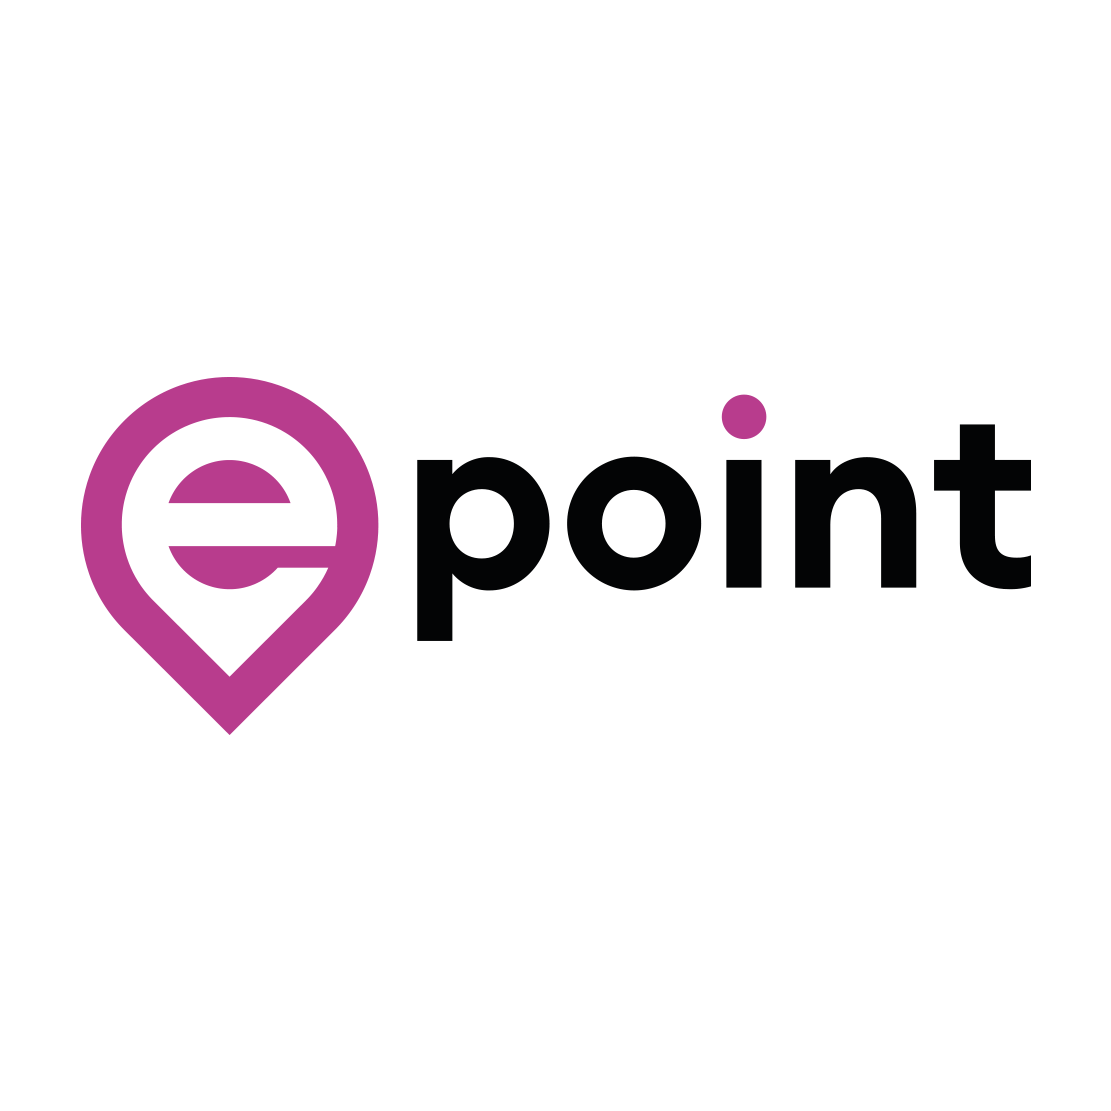 Epoint